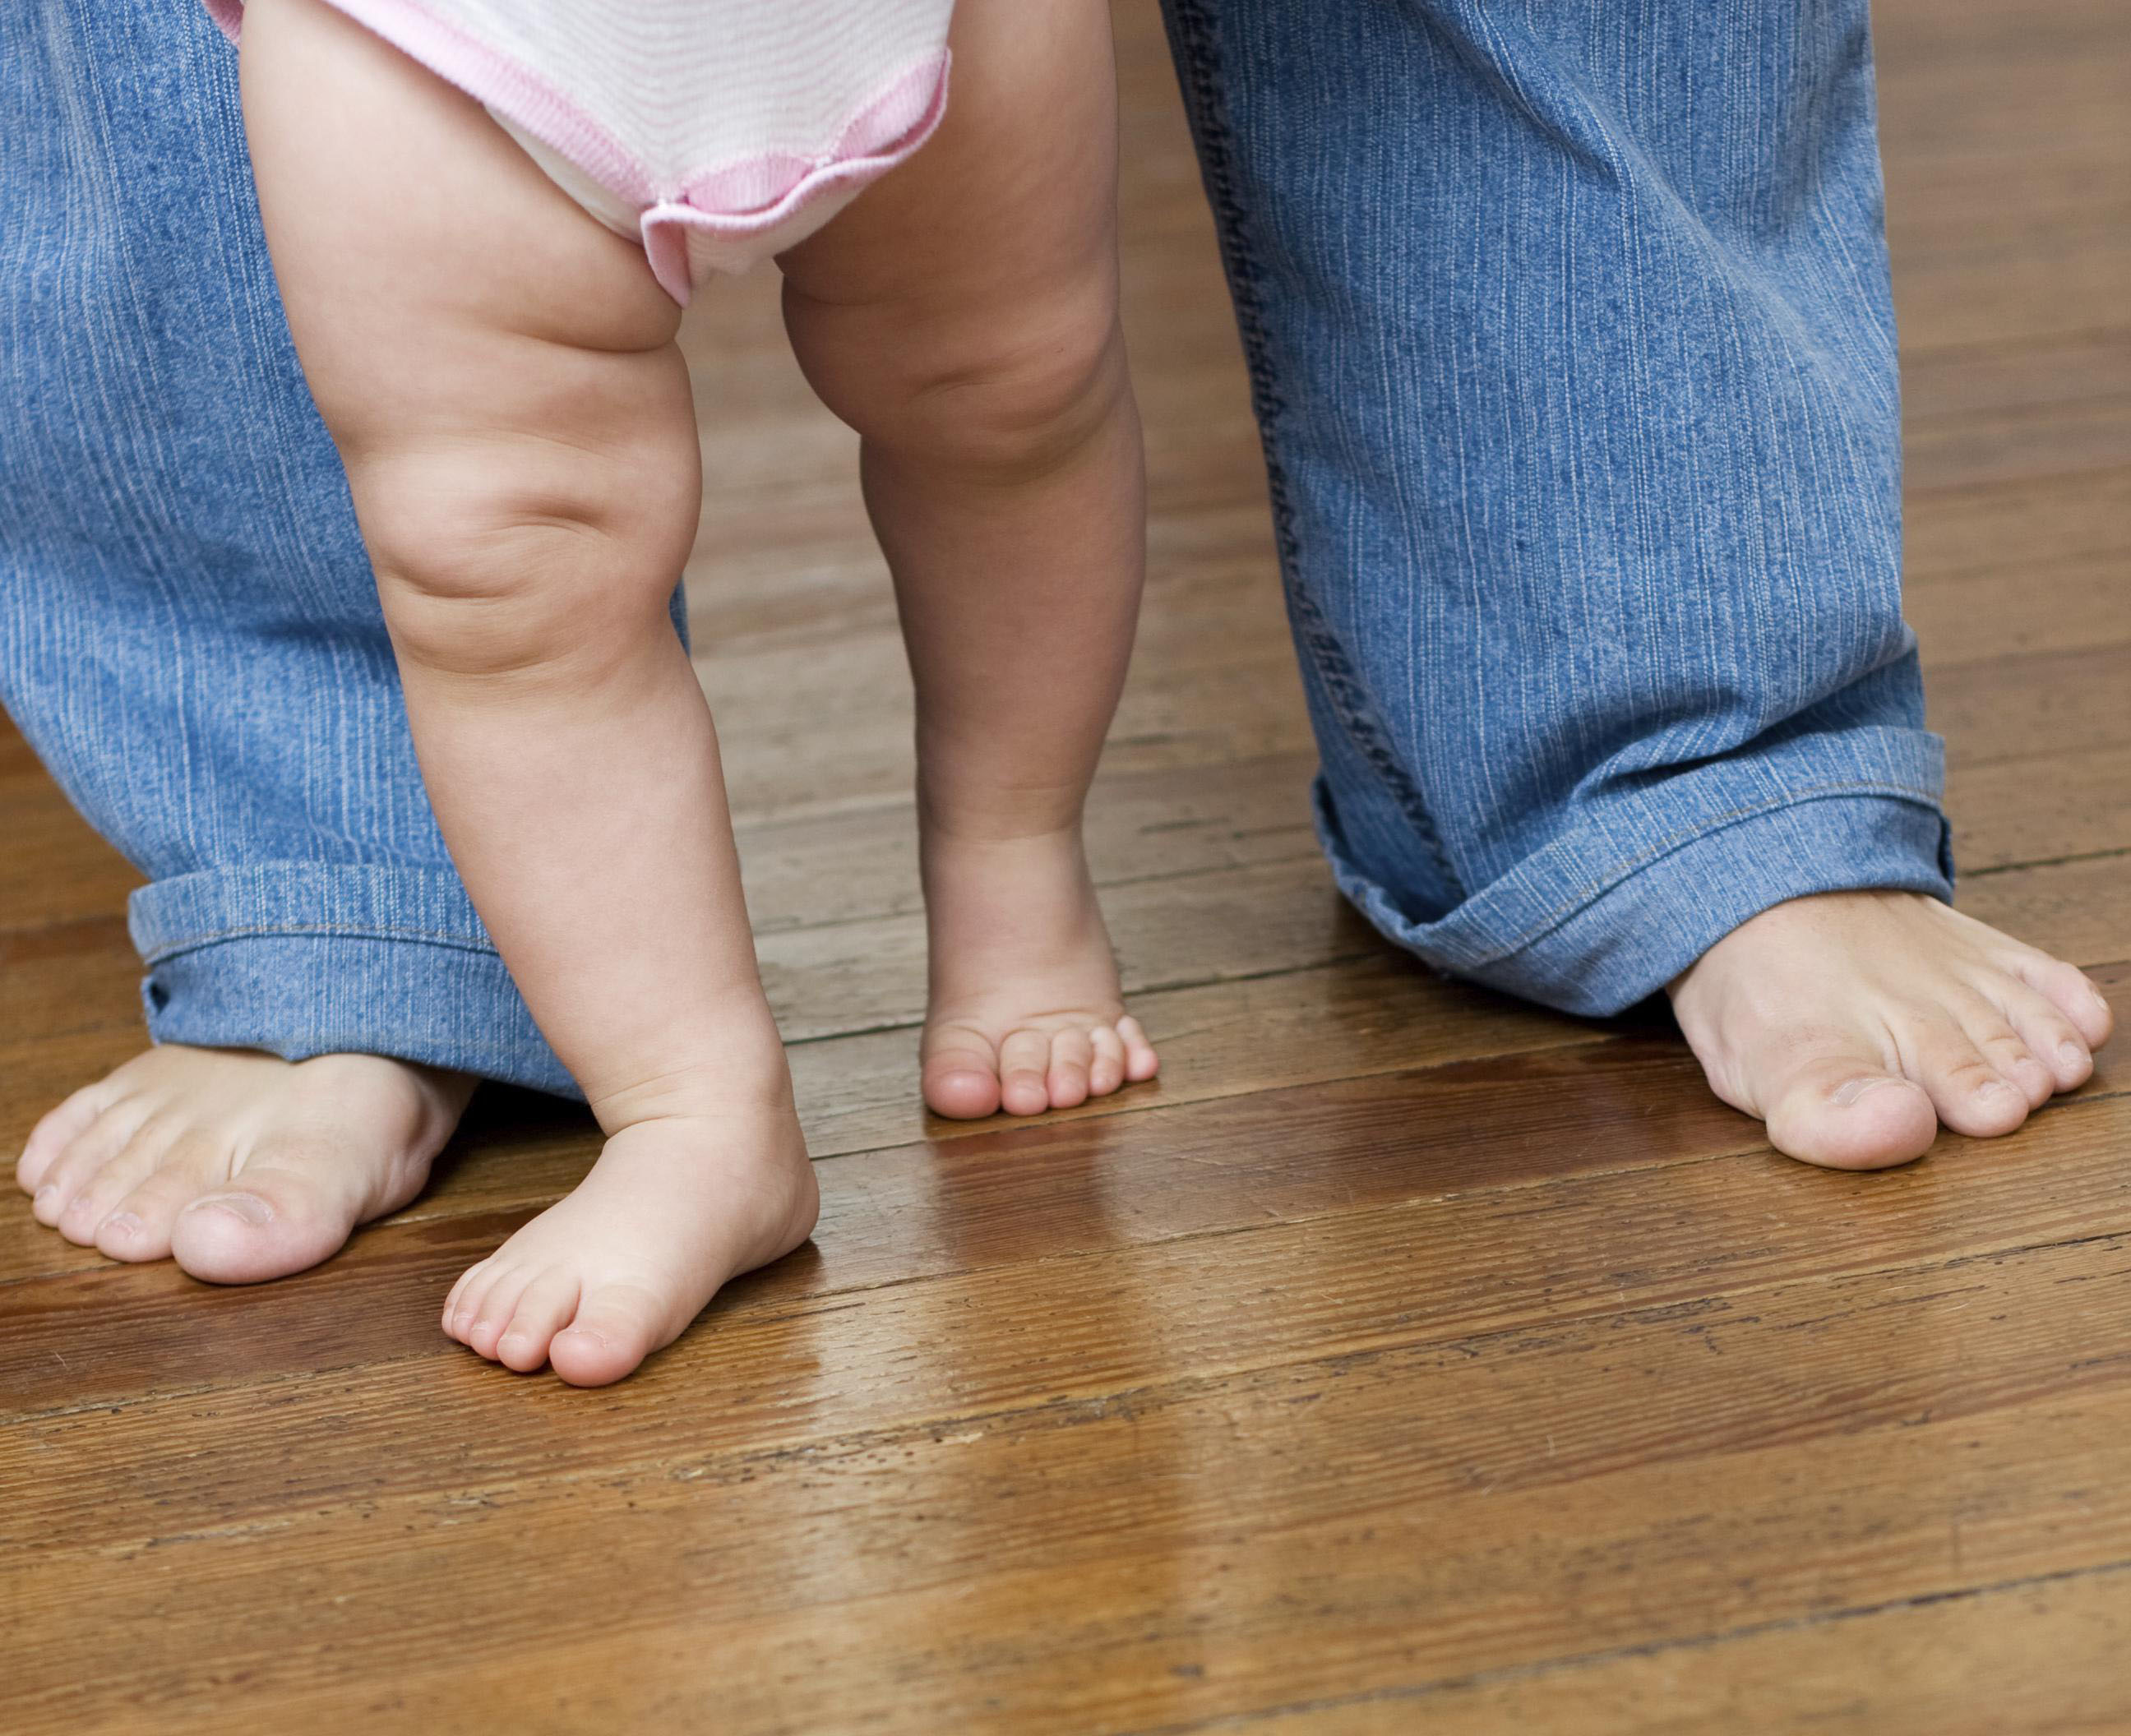 Baby walked on floor by parent